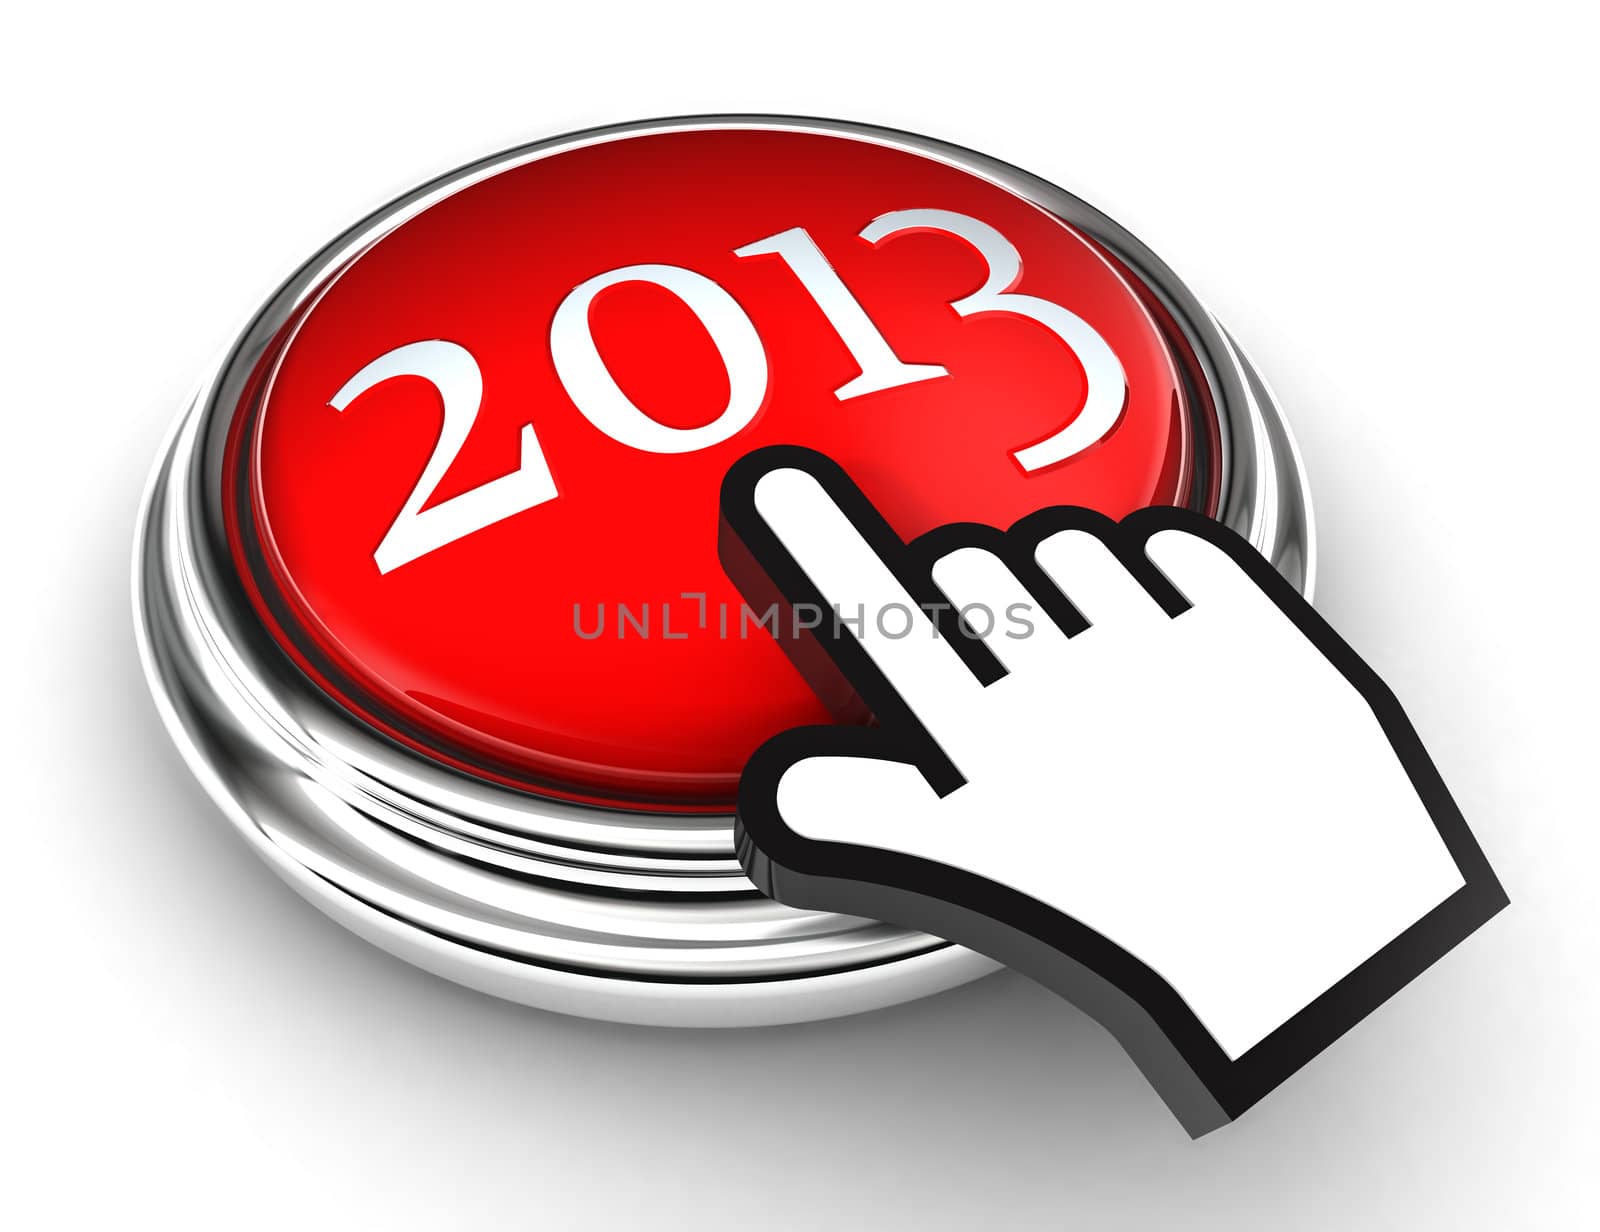 new year red button and cursor hand on white background. clipping paths included